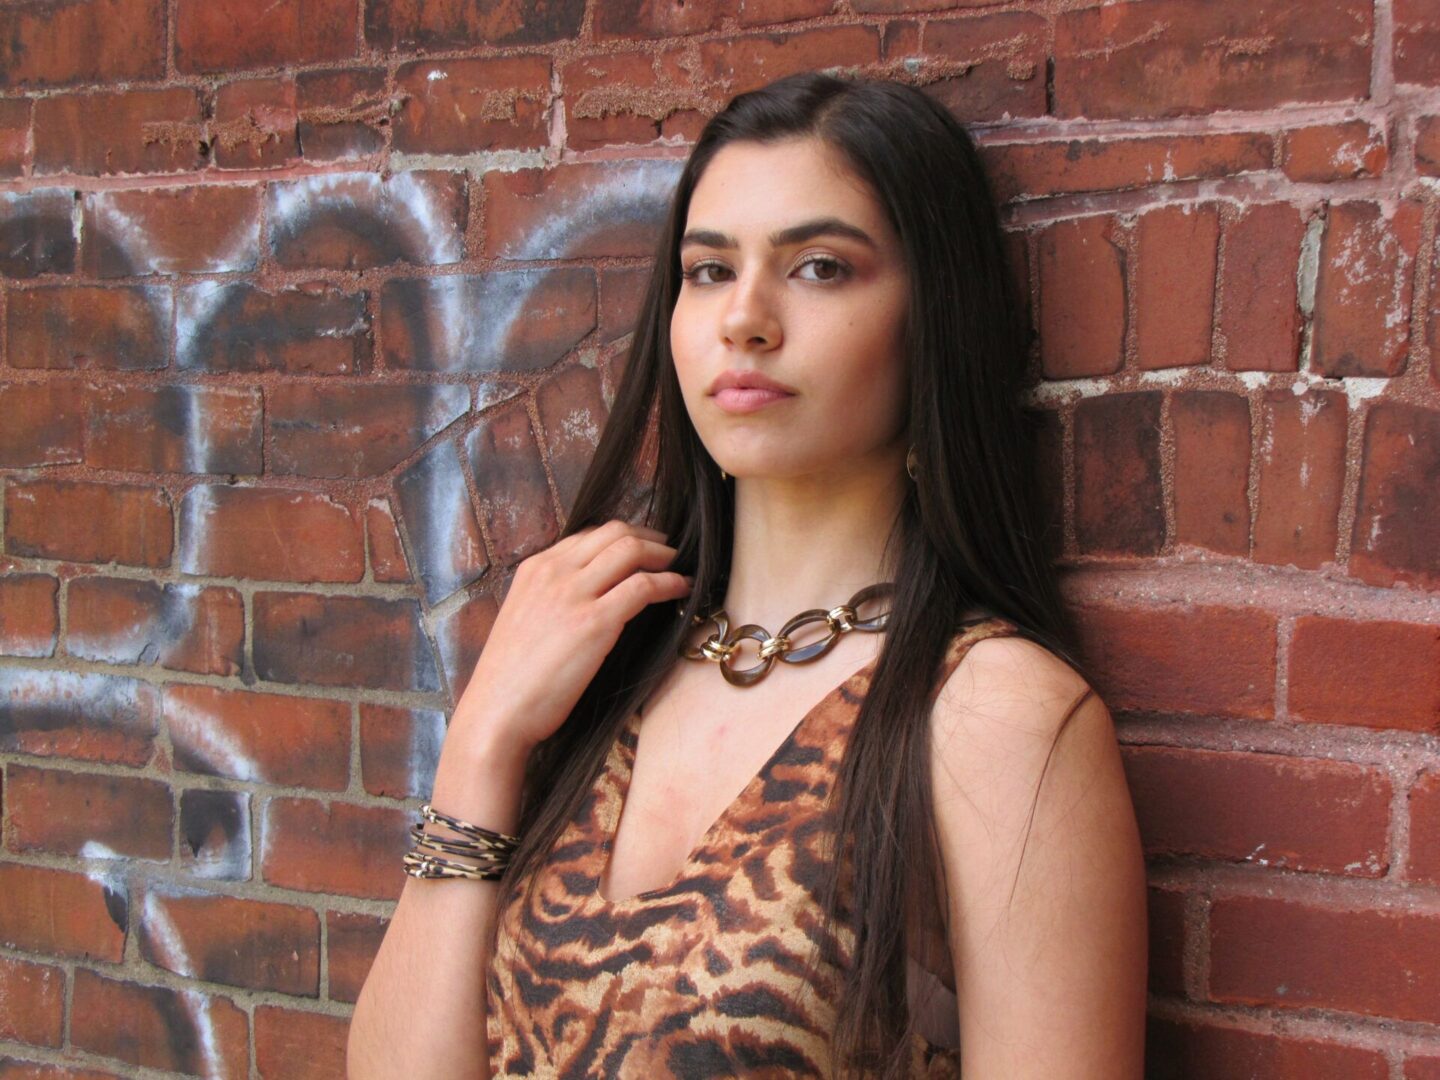 A woman in leopard striped tops wearing a necklace